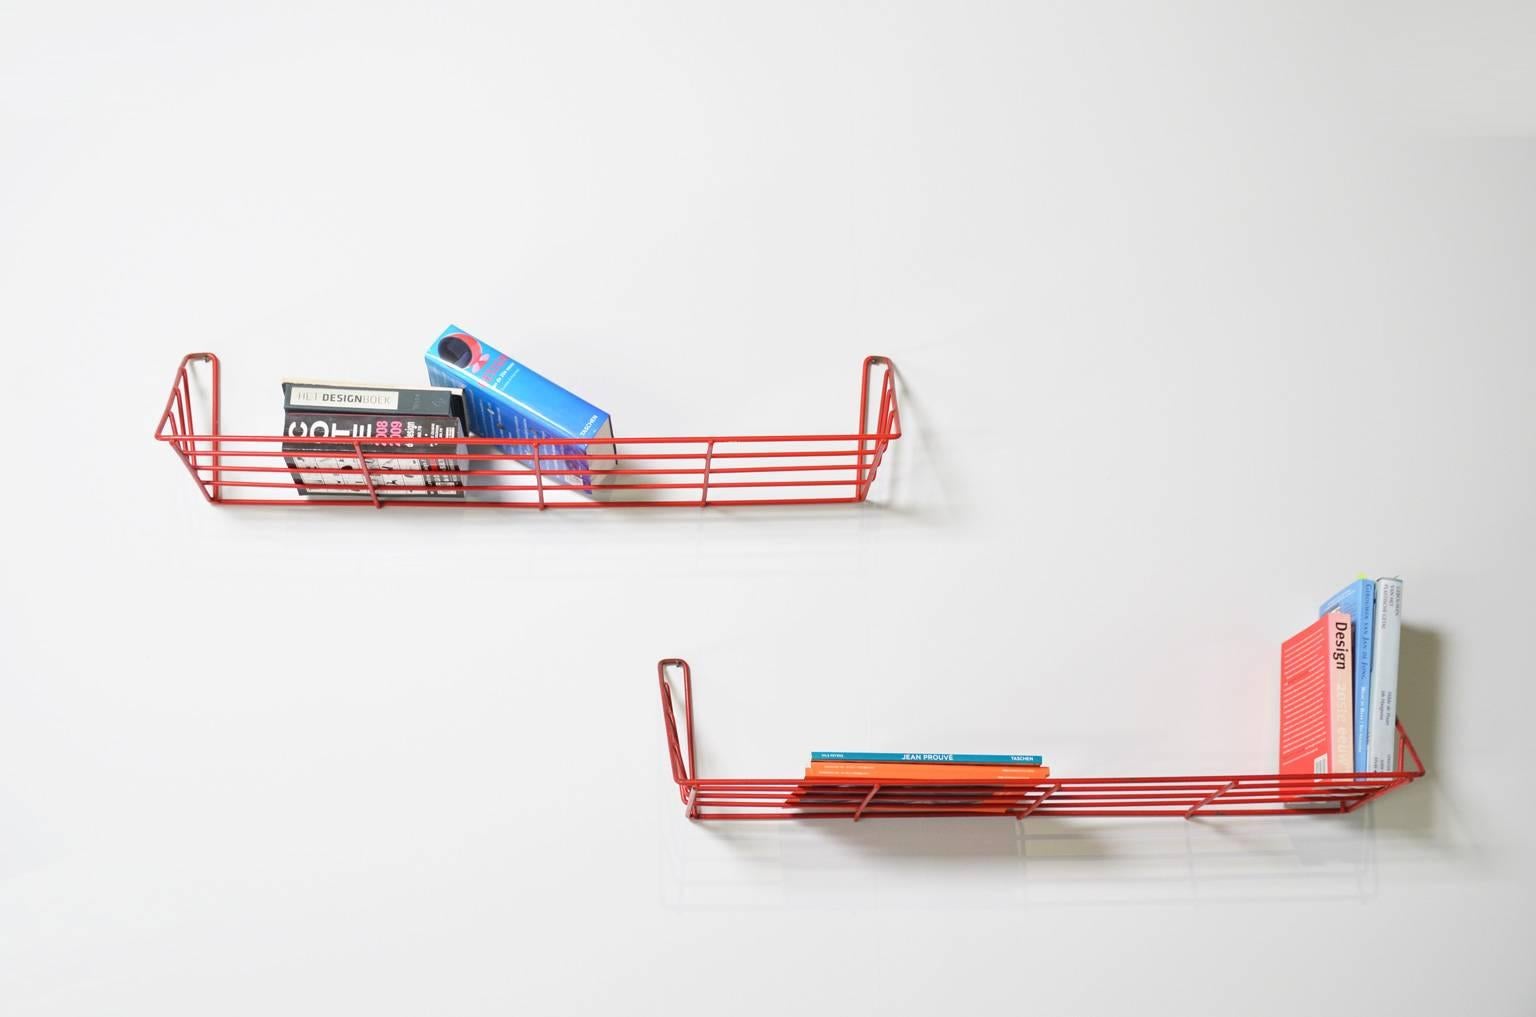 Red metal wire wall shelves by Dutch designer and Cobra co-founder Constant Nieuwenhuys for Dutch him 't Spectrum. Nieuwenhuys was a talented artist and is well known for his work as a fine artist, musician, writer and also for his visionary